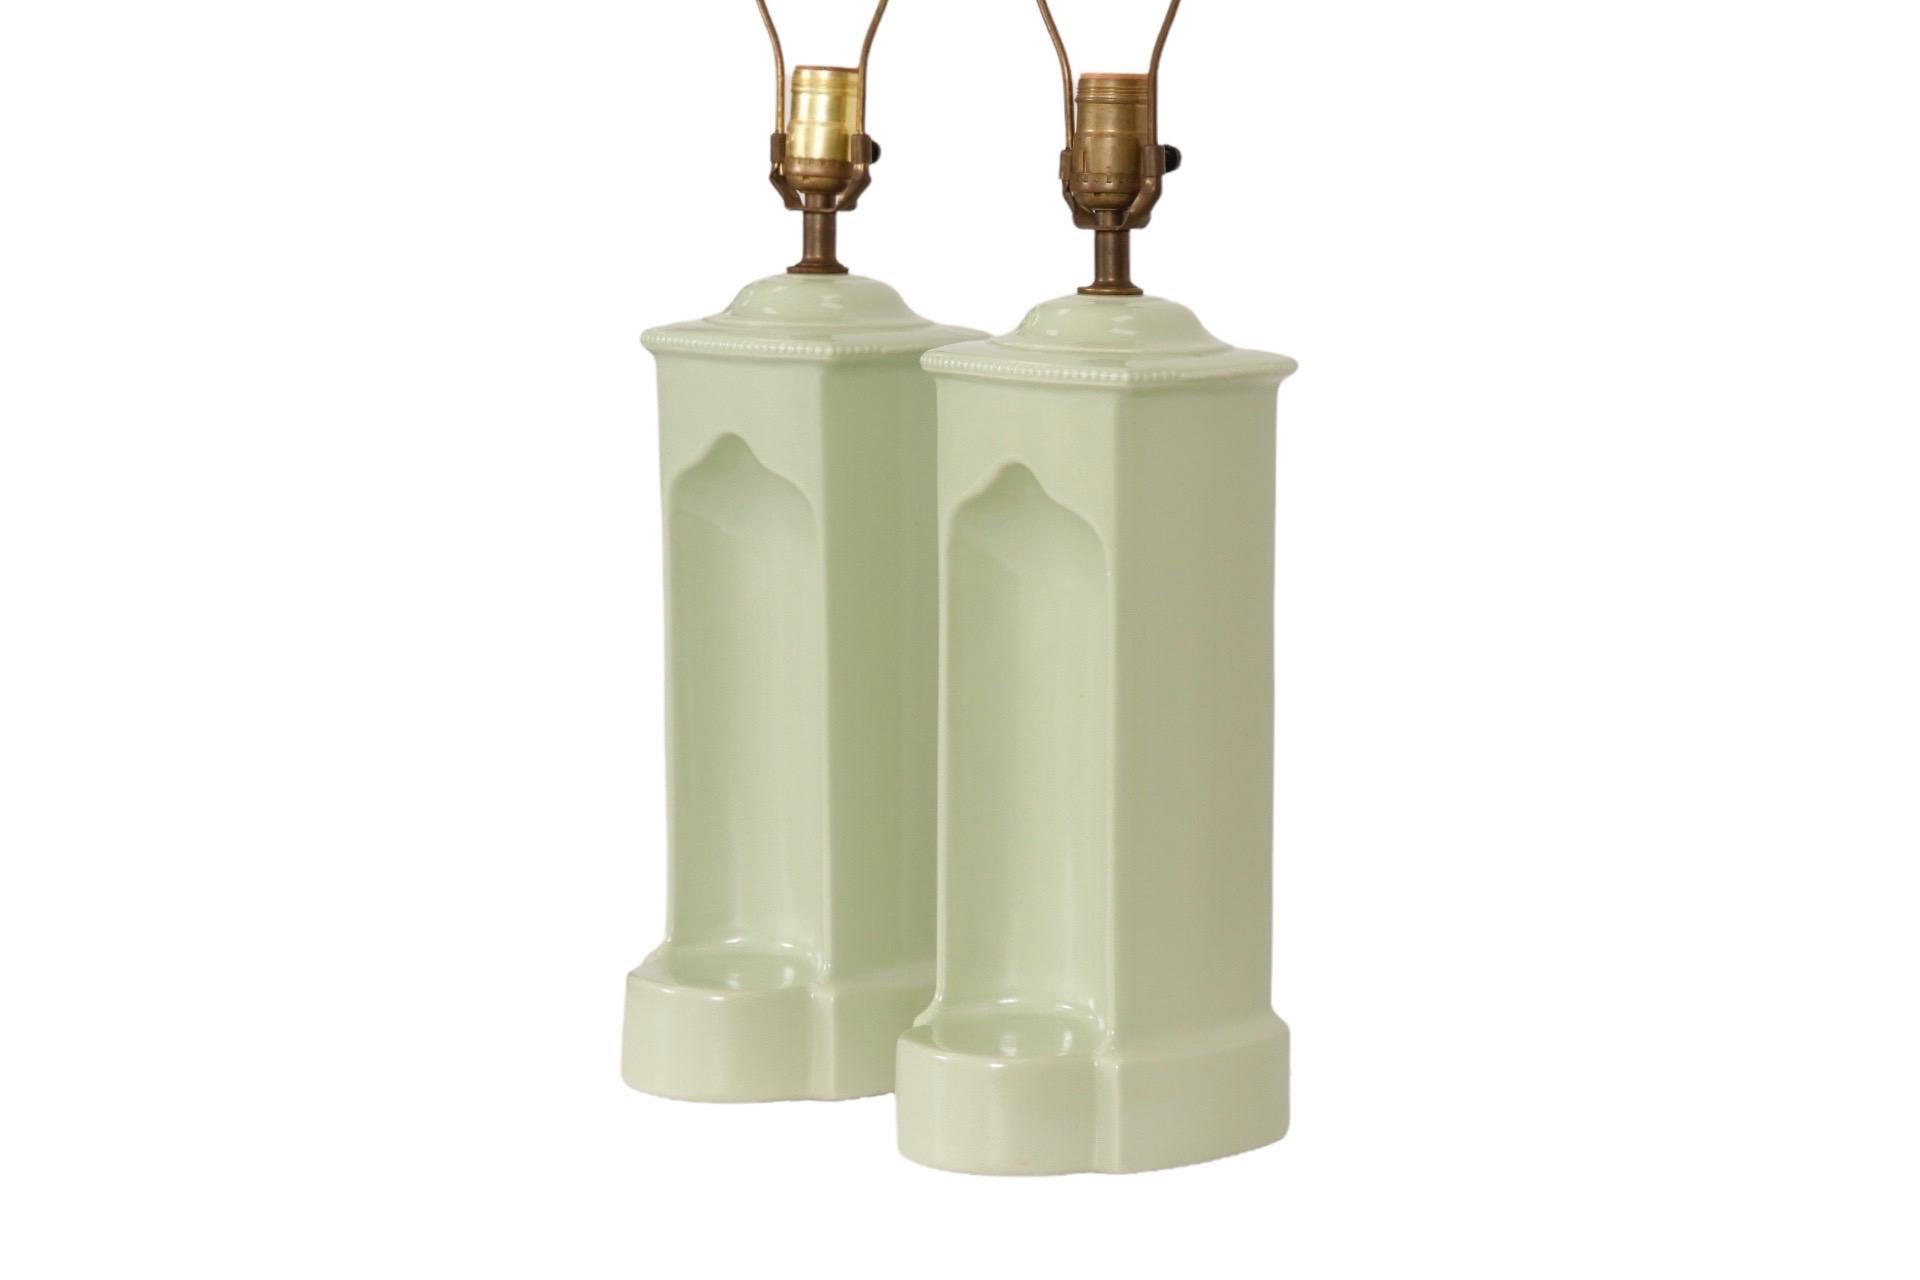 A pair of sage green ceramic table lamps made by Navis & Smith of Chicago, Illinois. Square bodies are trimmed with beaded edging around the top, stand on a rounded base and have a niche with a shelf in front. The maker's label is in the back, at